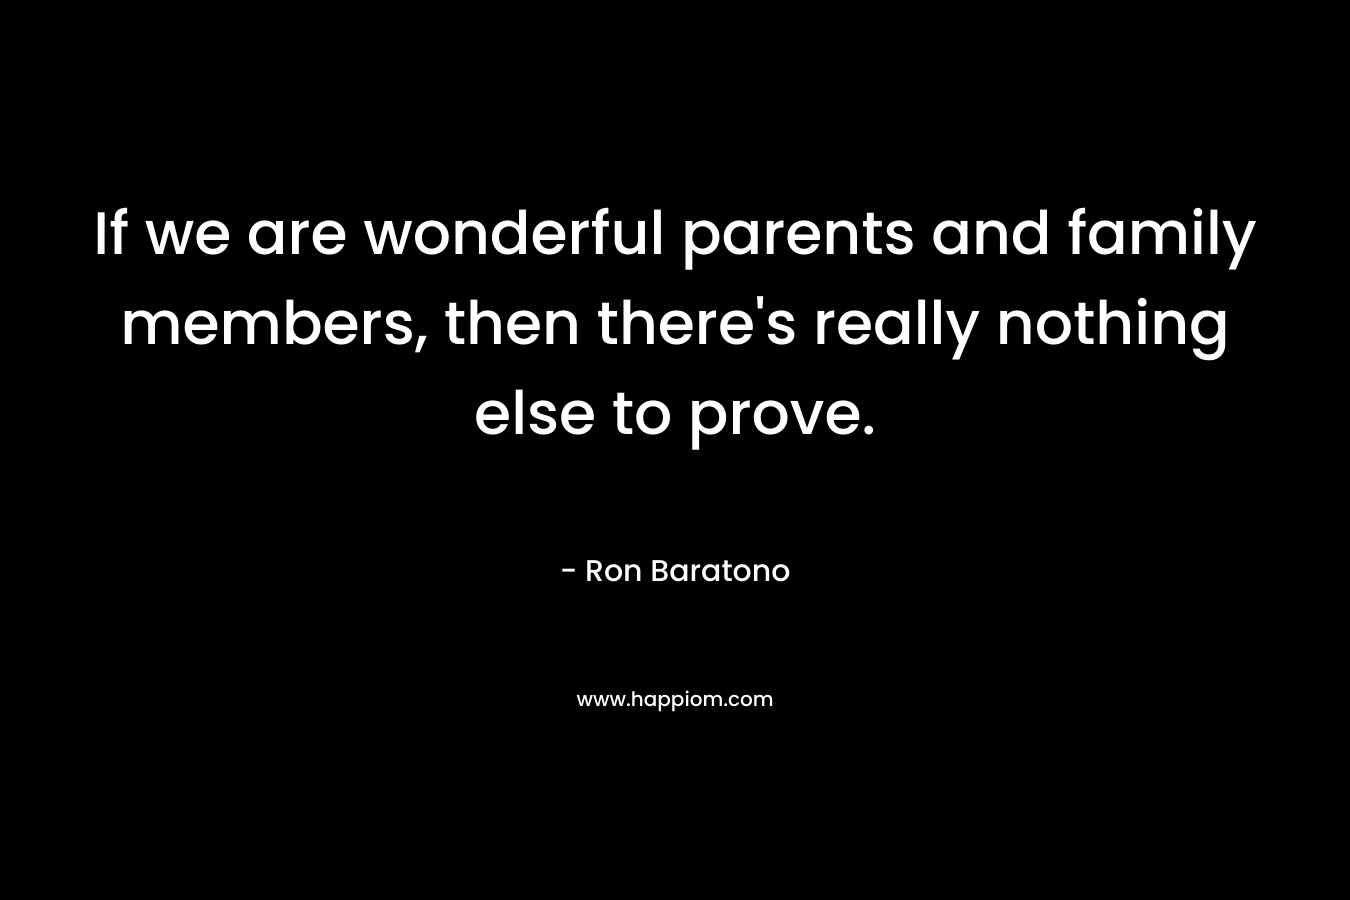 If we are wonderful parents and family members, then there’s really nothing else to prove. – Ron Baratono